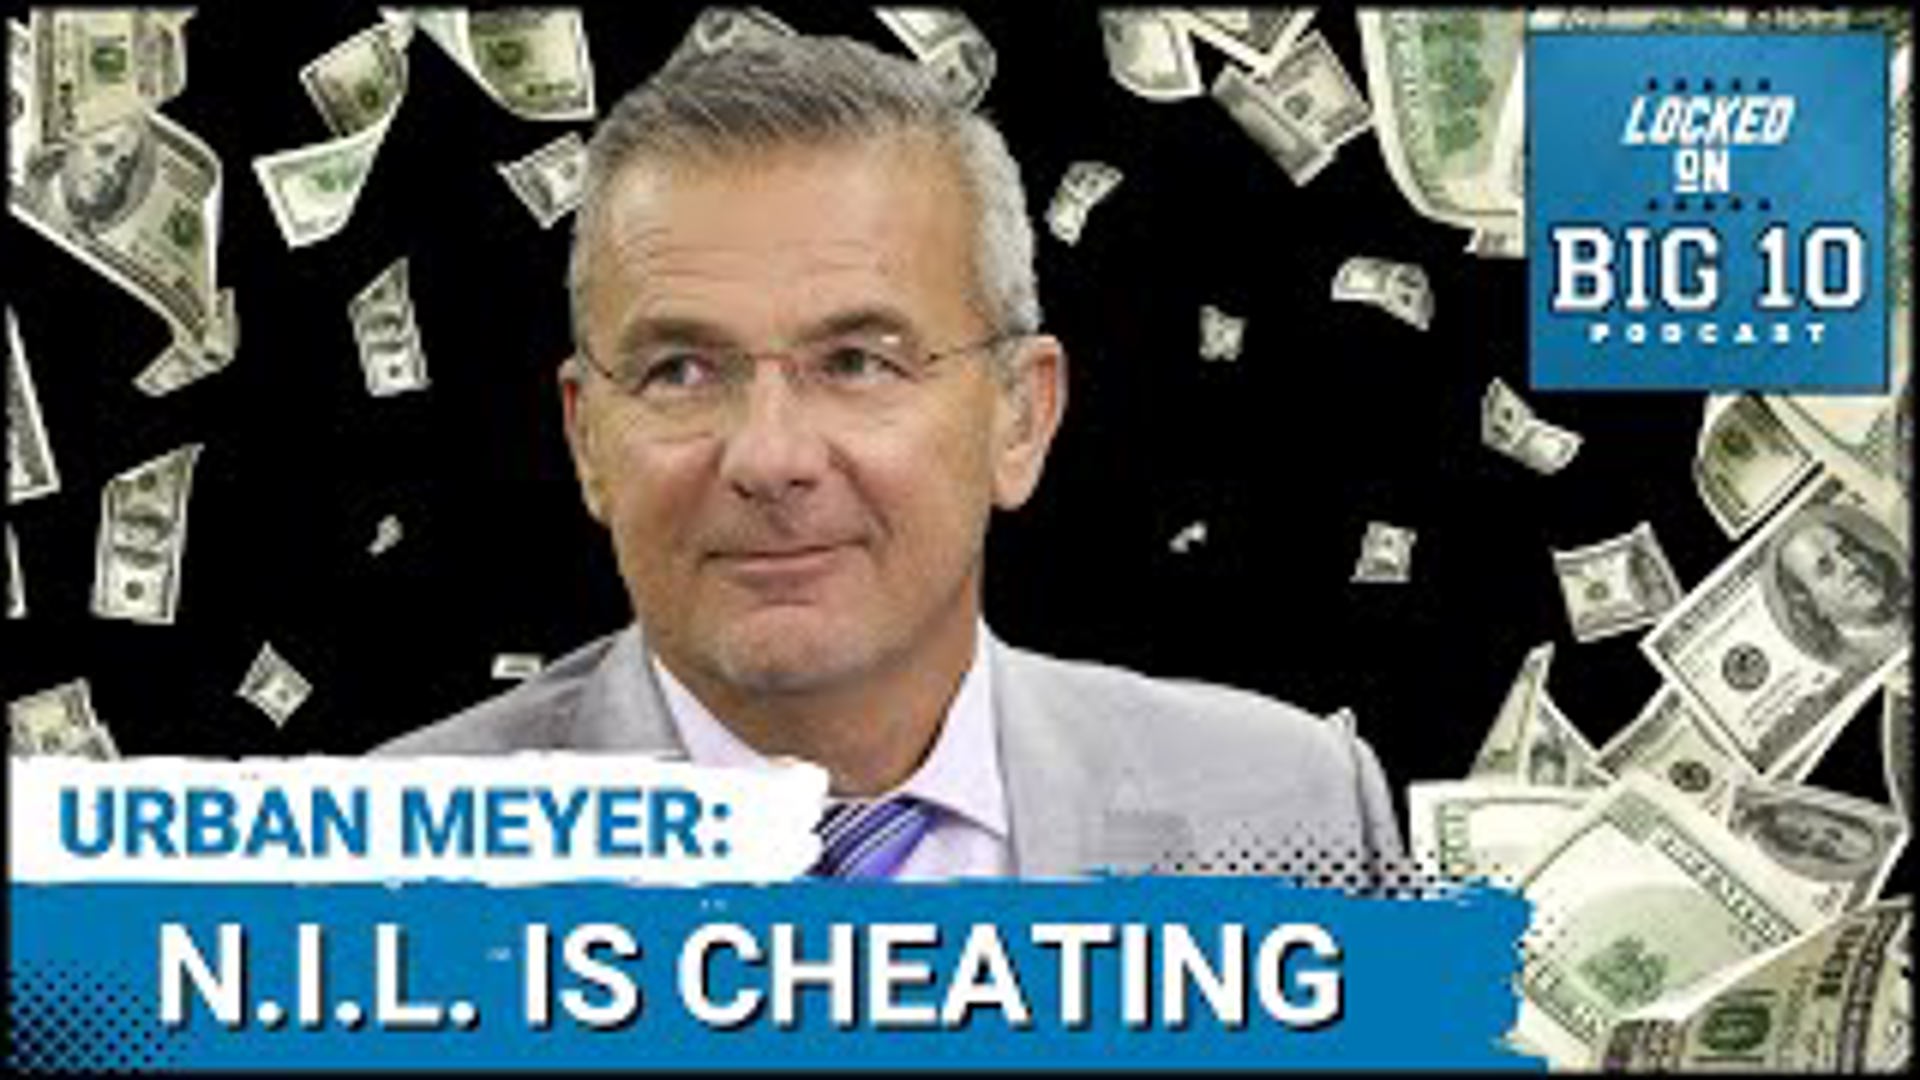 Former Ohio State football coach Urban Meyer says Name, Image, and Likeness (NIL) payments have evolved into cheating in college football.